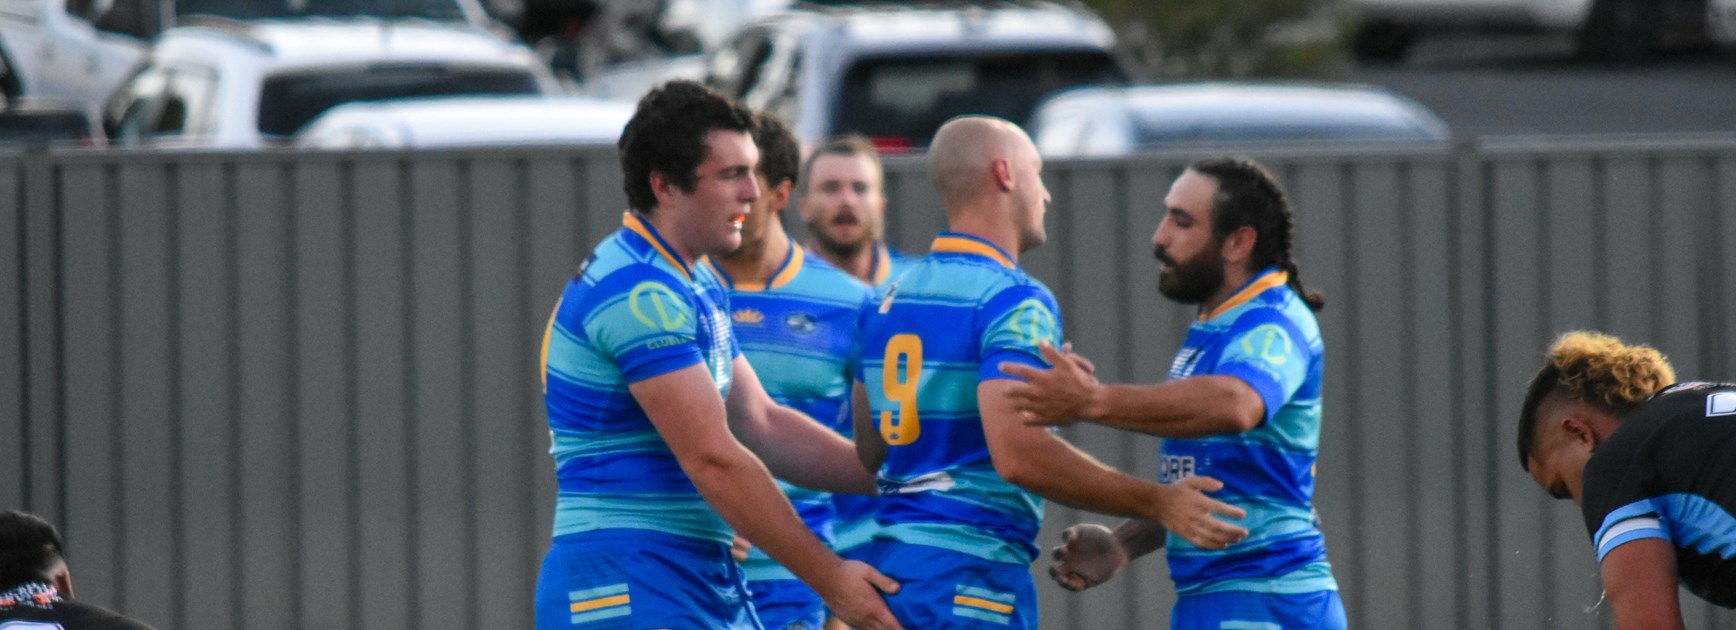 Canberra Raiders Cup Round 3 Wrap